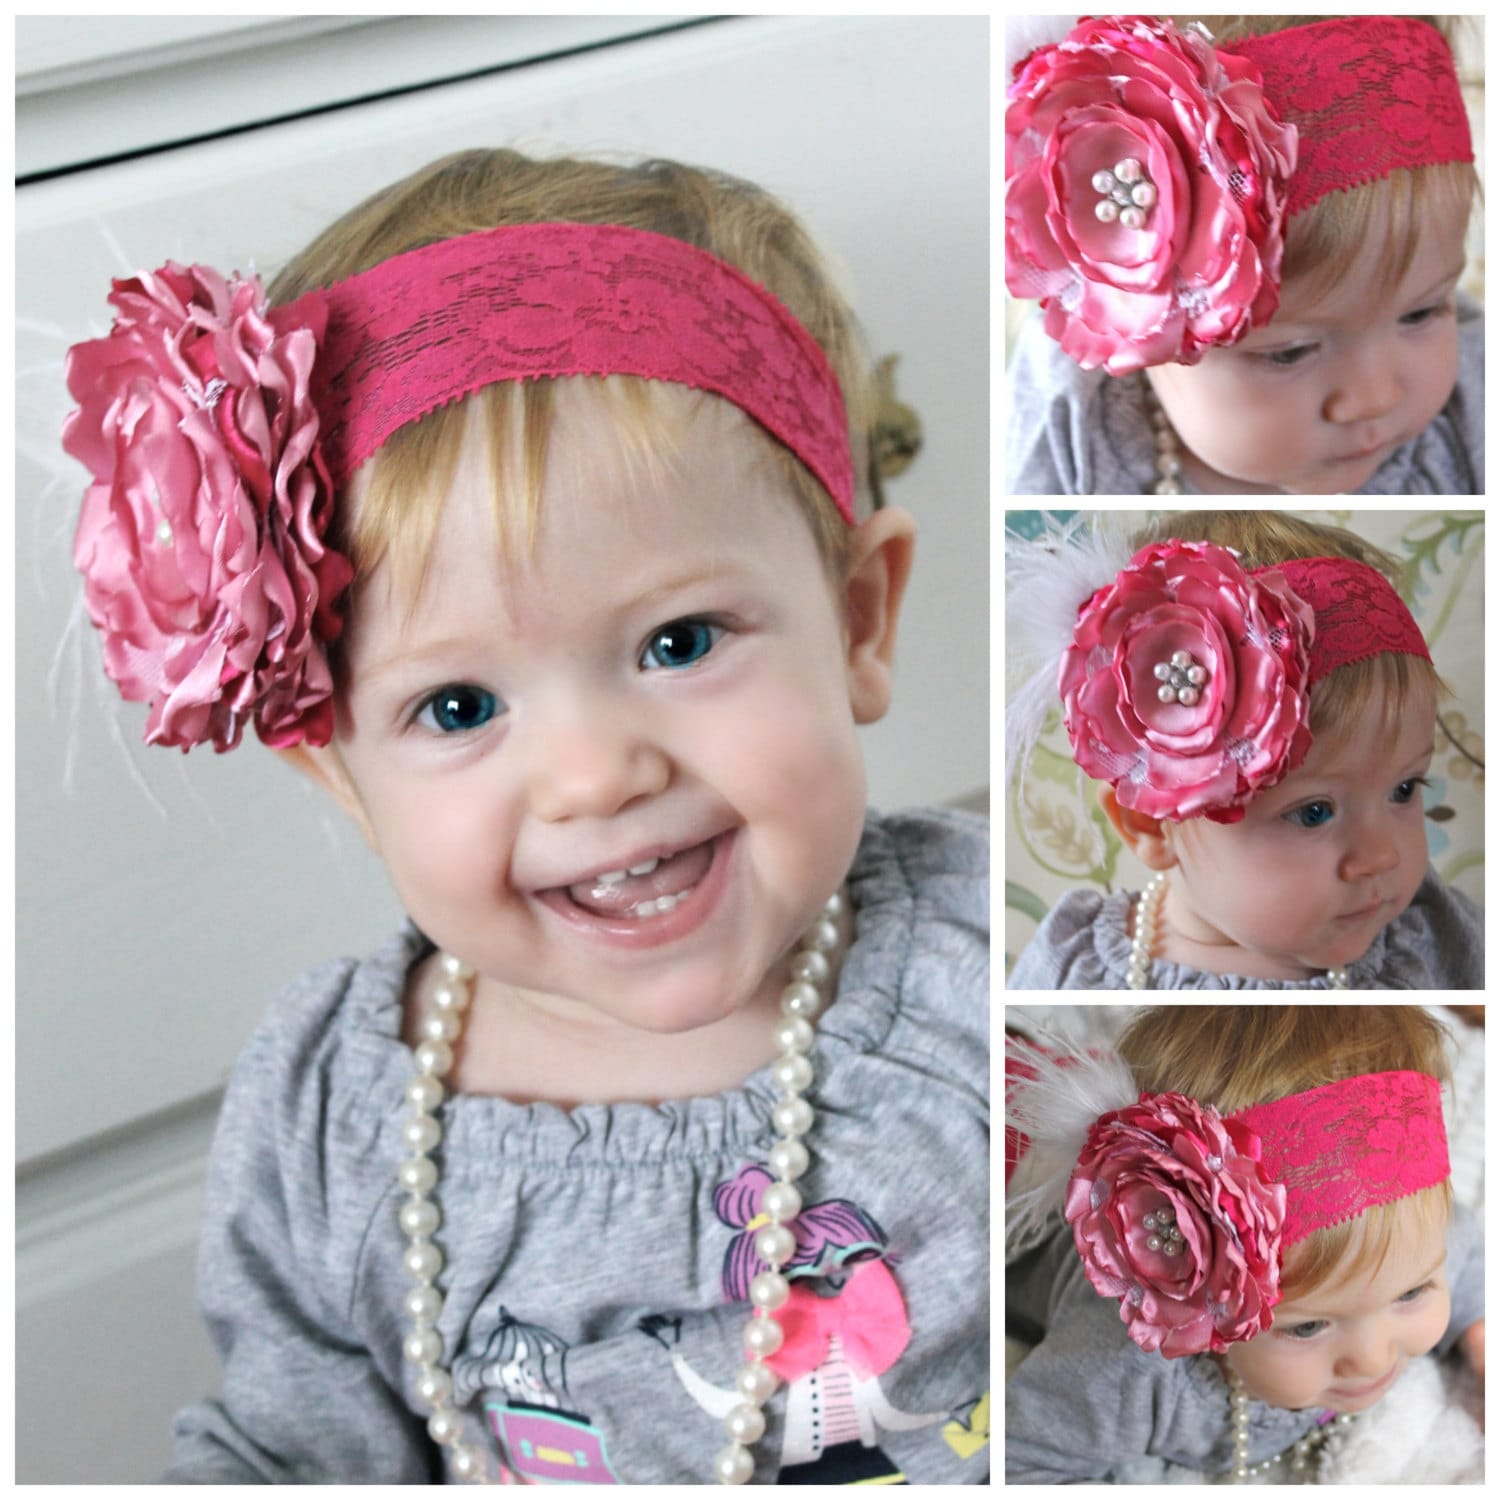 An artisan lover: Headband Shades of pink silk flower pearls feathers ...